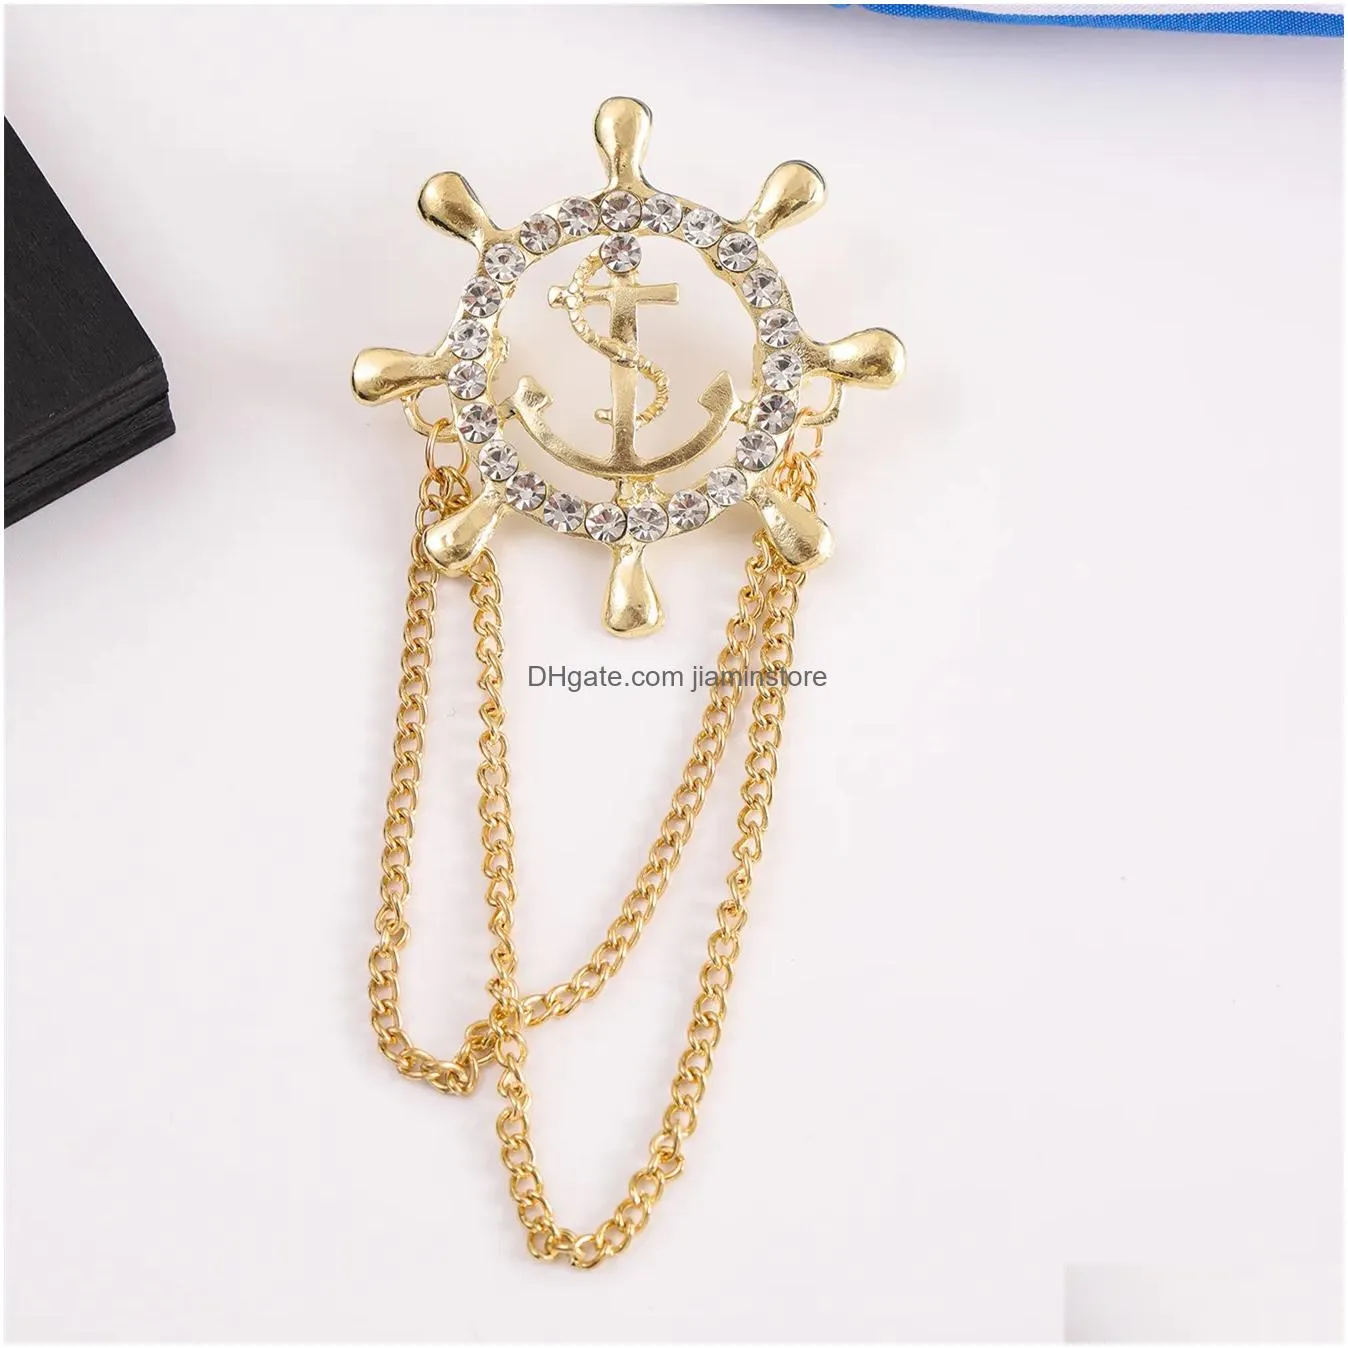 mens gold rudder shape personalized chain alloy clothing shirt accessories high-grade temperament gift brooch